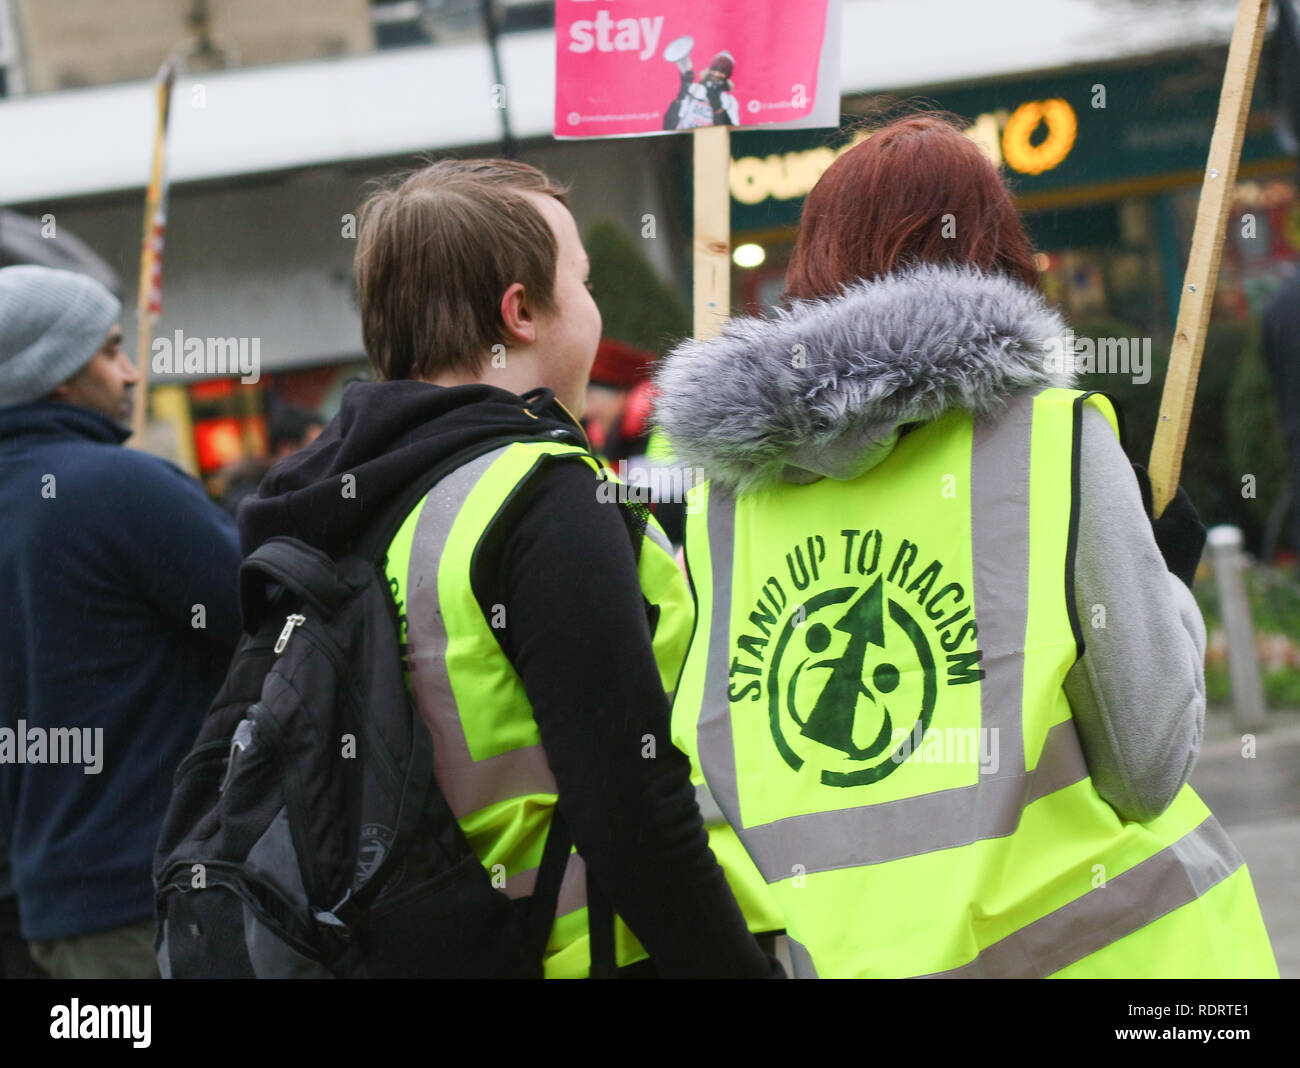 Bolton, UK. 19 January 2019. Bolton, Lancashire, UK. The Bolton Yellow Vest Protest saw a crowds f people in high-visibility jackets gather at 12.30pm on Saturday, January 19, in Victoria Square in front of the Town Hall in association with other rallies organised by The People's Assembly.  Leila Hassan and Sasha Roper are part of Stand Up To Racism Bolton, the group which is organising the rally. They take inspiration from the 'yellow vest' protests in France which have seen hundreds of thousands of people march against austerity policies in Paris.   Credit: Phil Taylor/Alamy Live News Stock Photo